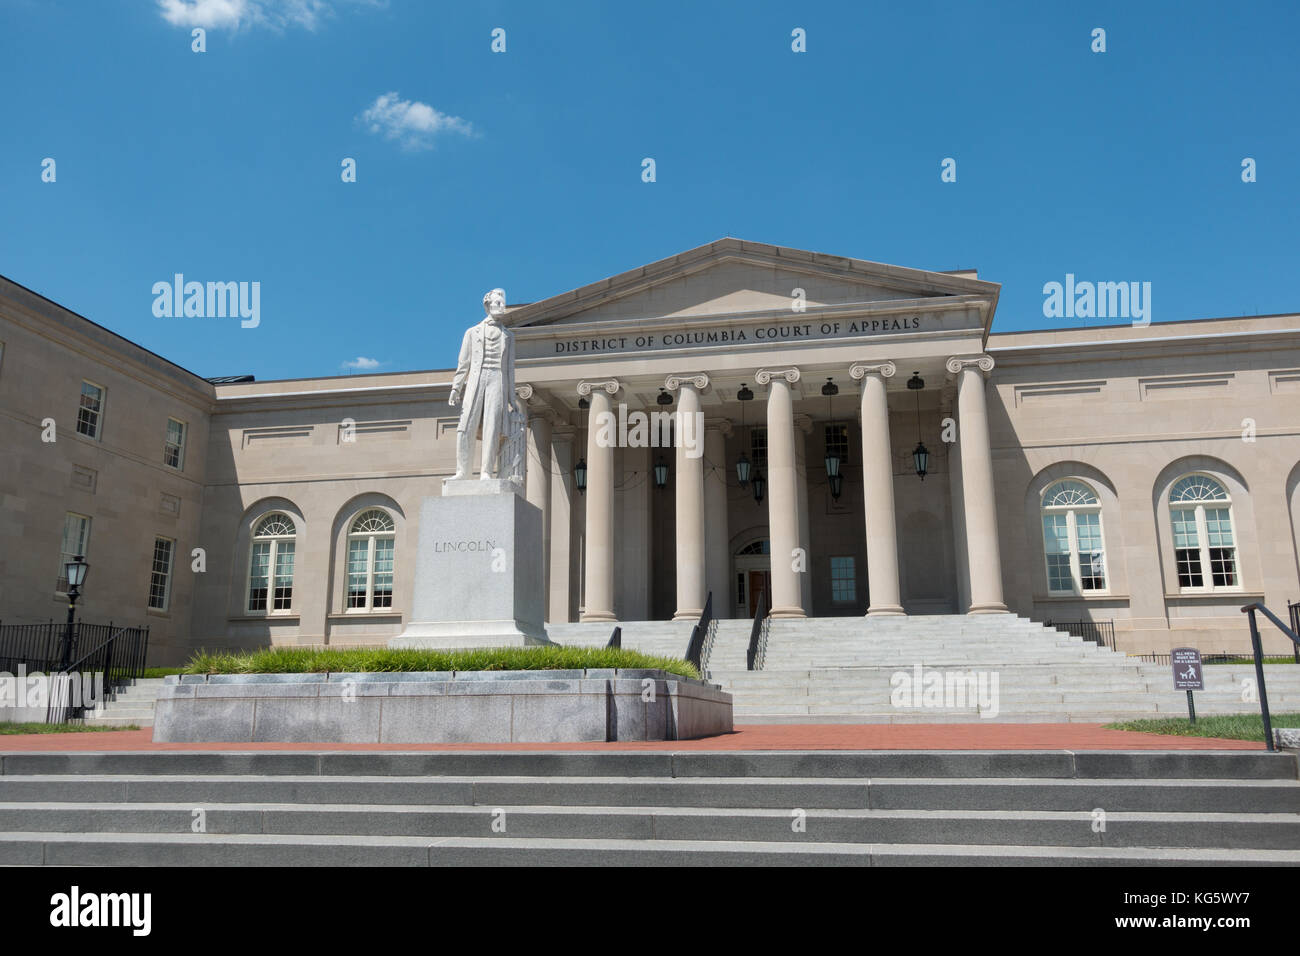 The District of Columbia Court of Appeals Building with a statue of President Abraham Lincoln, Washington DC, United States. Stock Photo